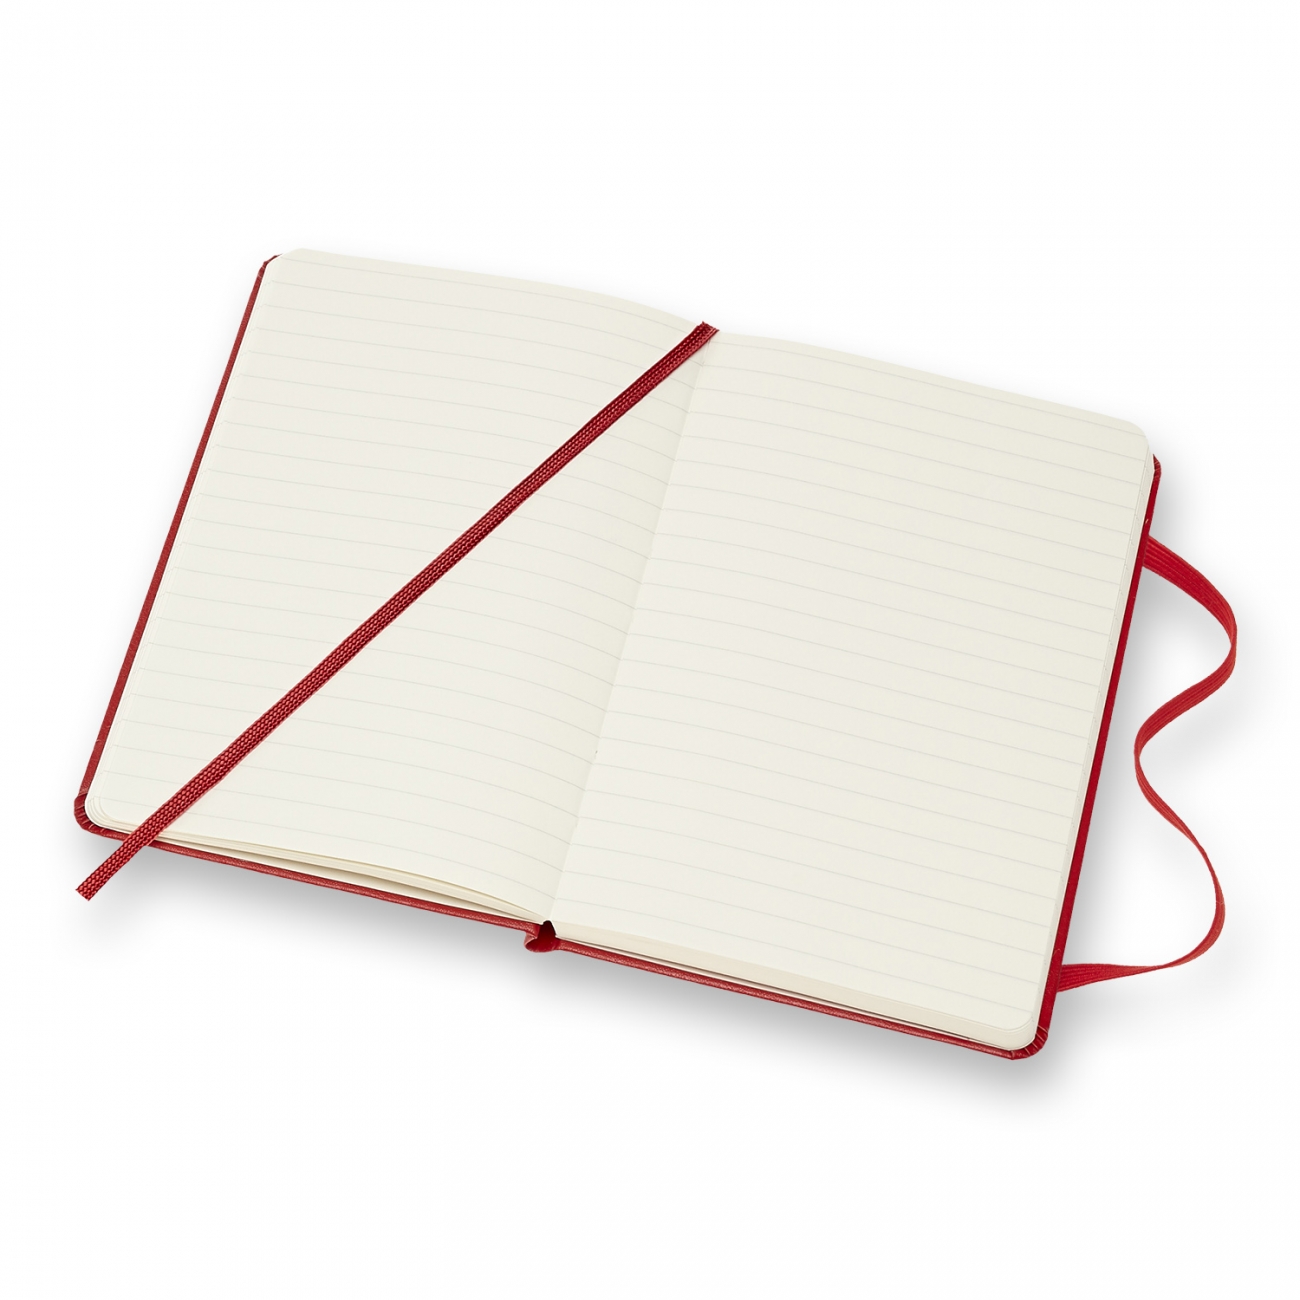 CLASSIC HARD COVER NOTEBOOK - RULED - POCKET - SCARLET RED